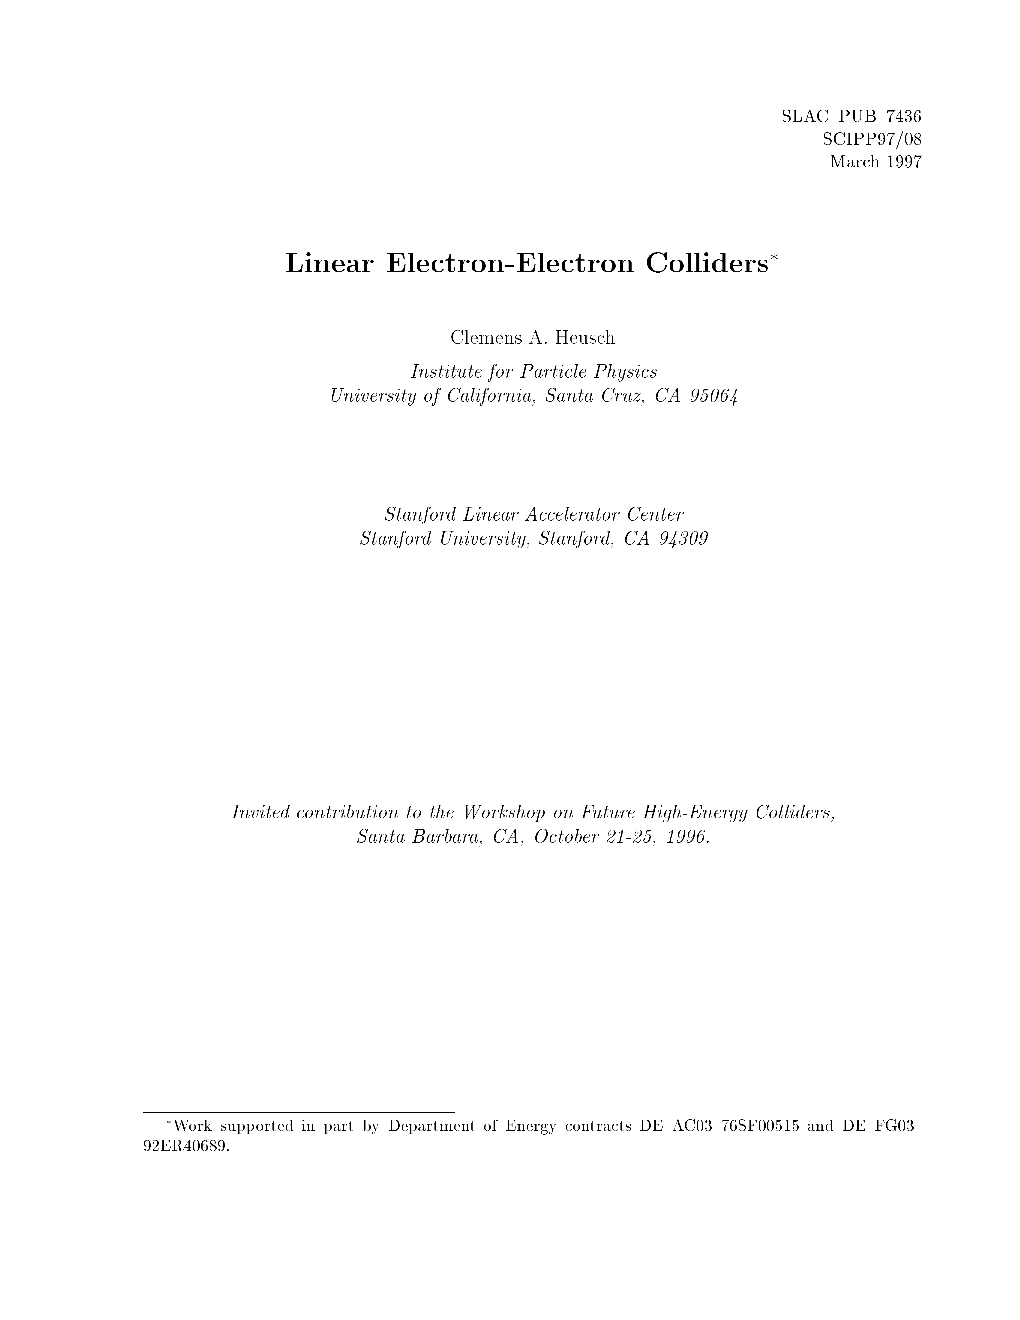 Linear Electron-Electron Colliders